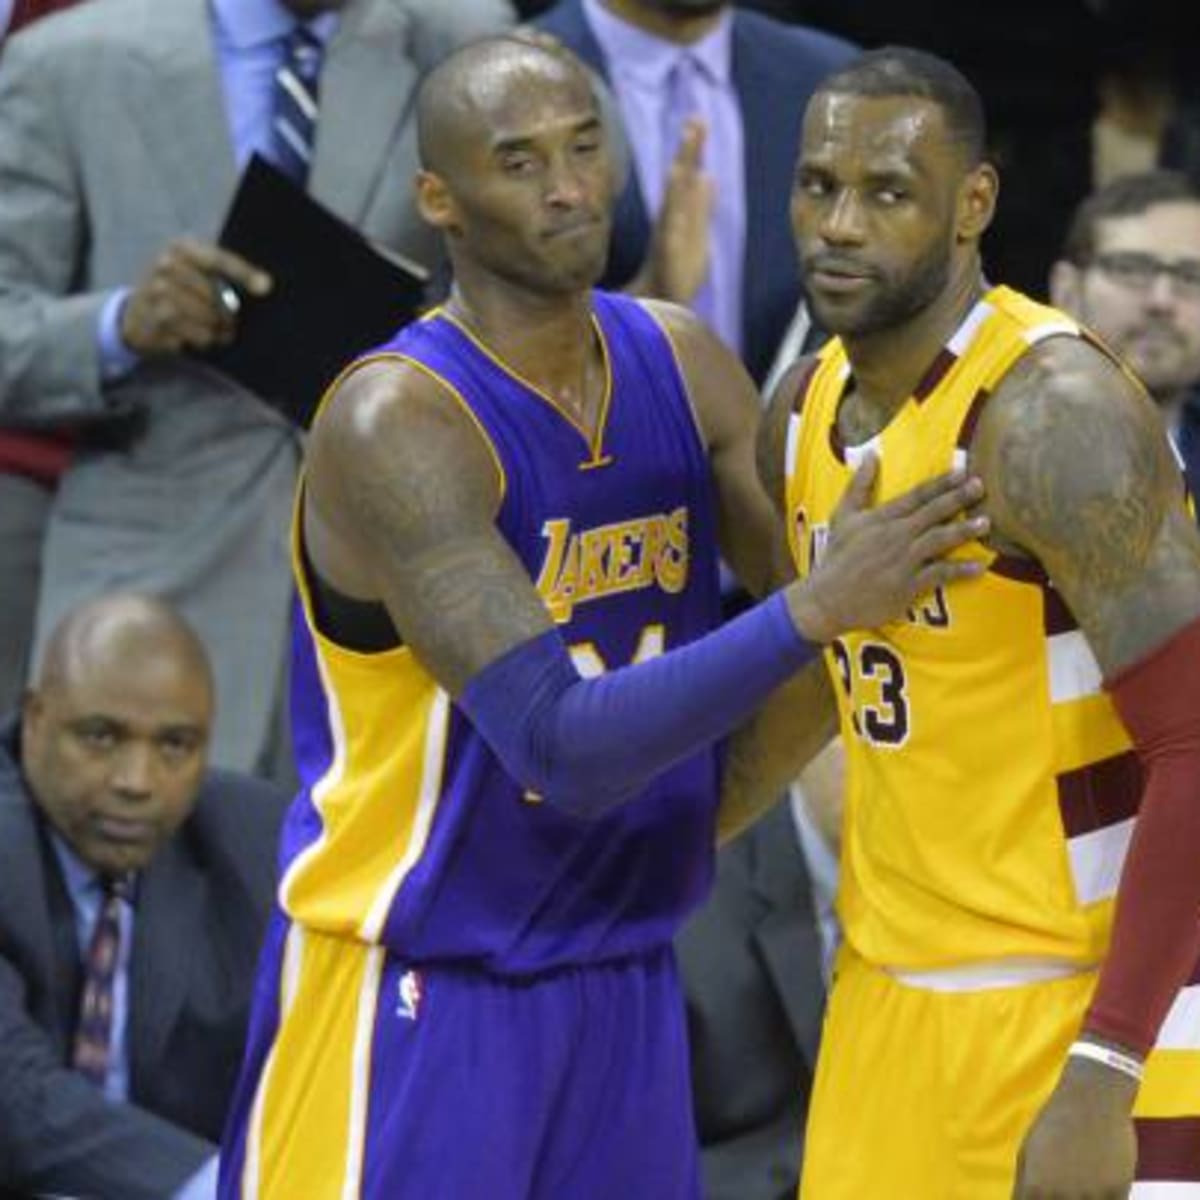 LeBron James: Kobe Bryant's embrace a sign of mutual respect